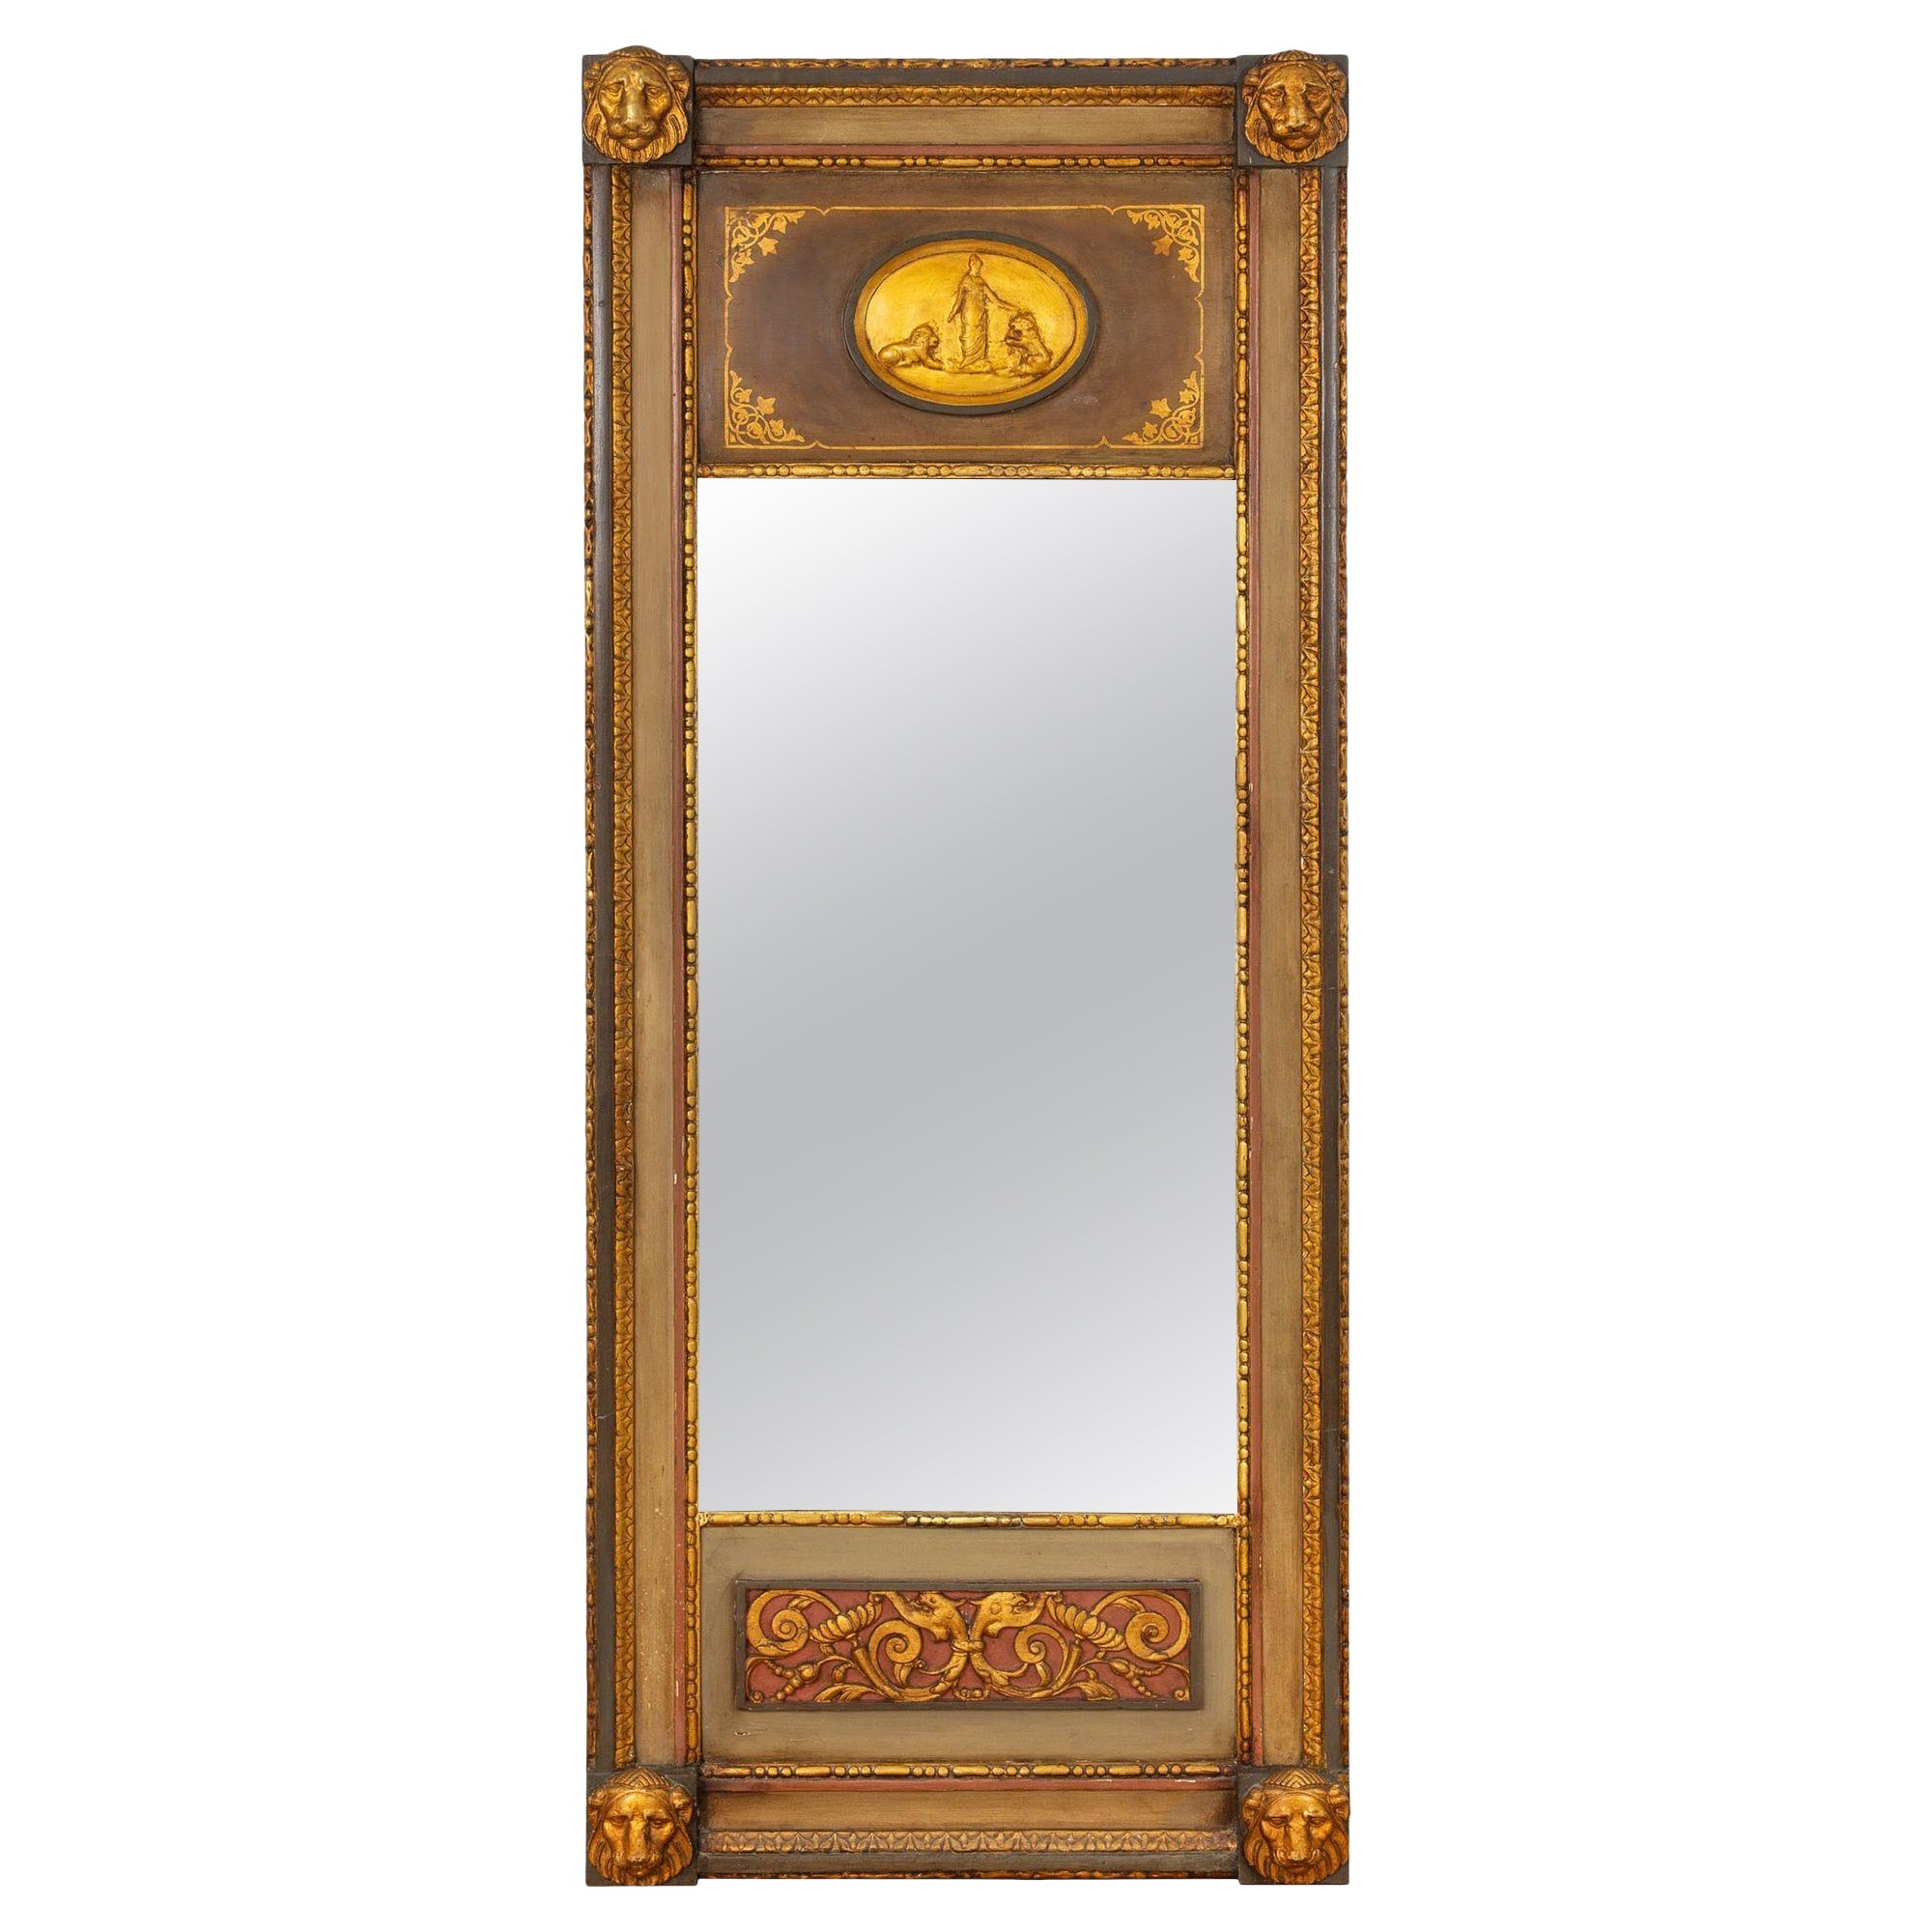 Northern European Neoclassical Painted Antique Pier Mirror, 19th Century For Sale